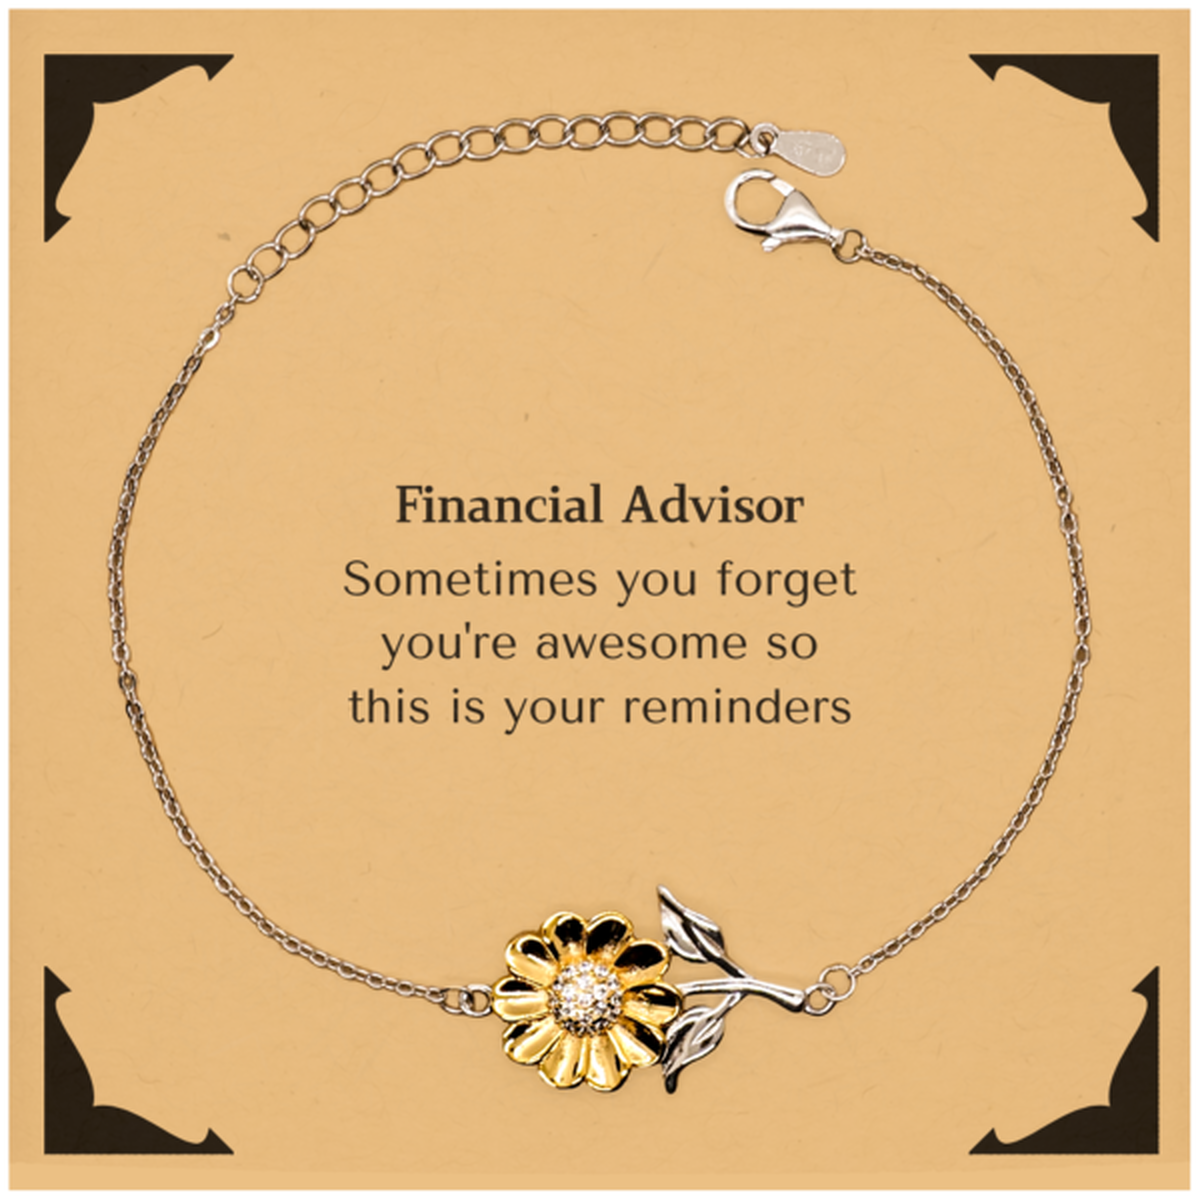 Sentimental Financial Advisor Sunflower Bracelet, Financial Advisor Sometimes you forget you're awesome so this is your reminders, Graduation Christmas Birthday Gifts for Financial Advisor, Men, Women, Coworkers